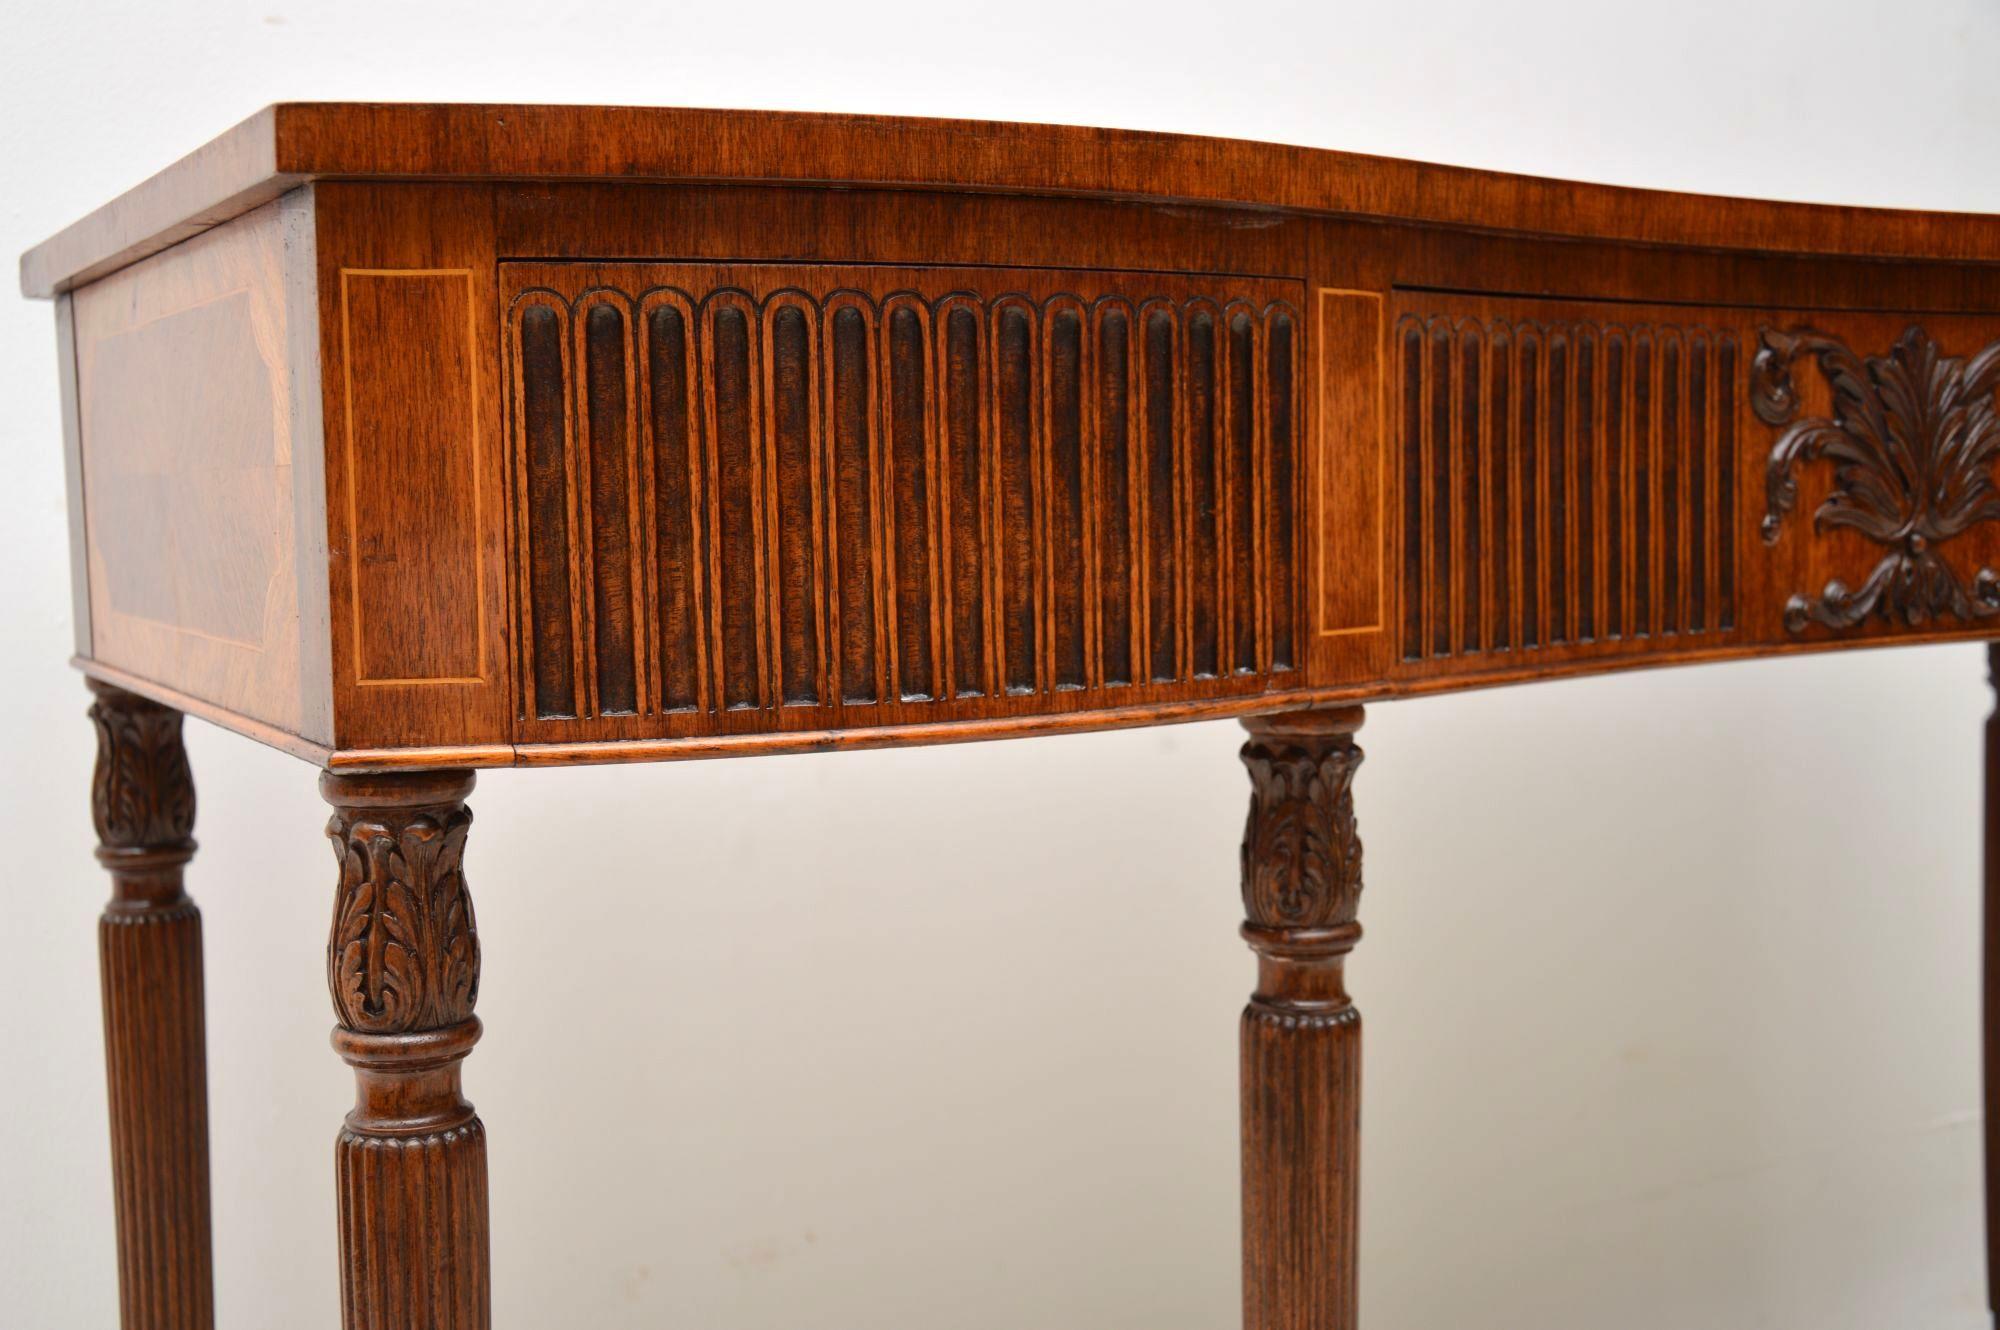 English Antique Inlaid Mahogany and Kingwood Server Console Table